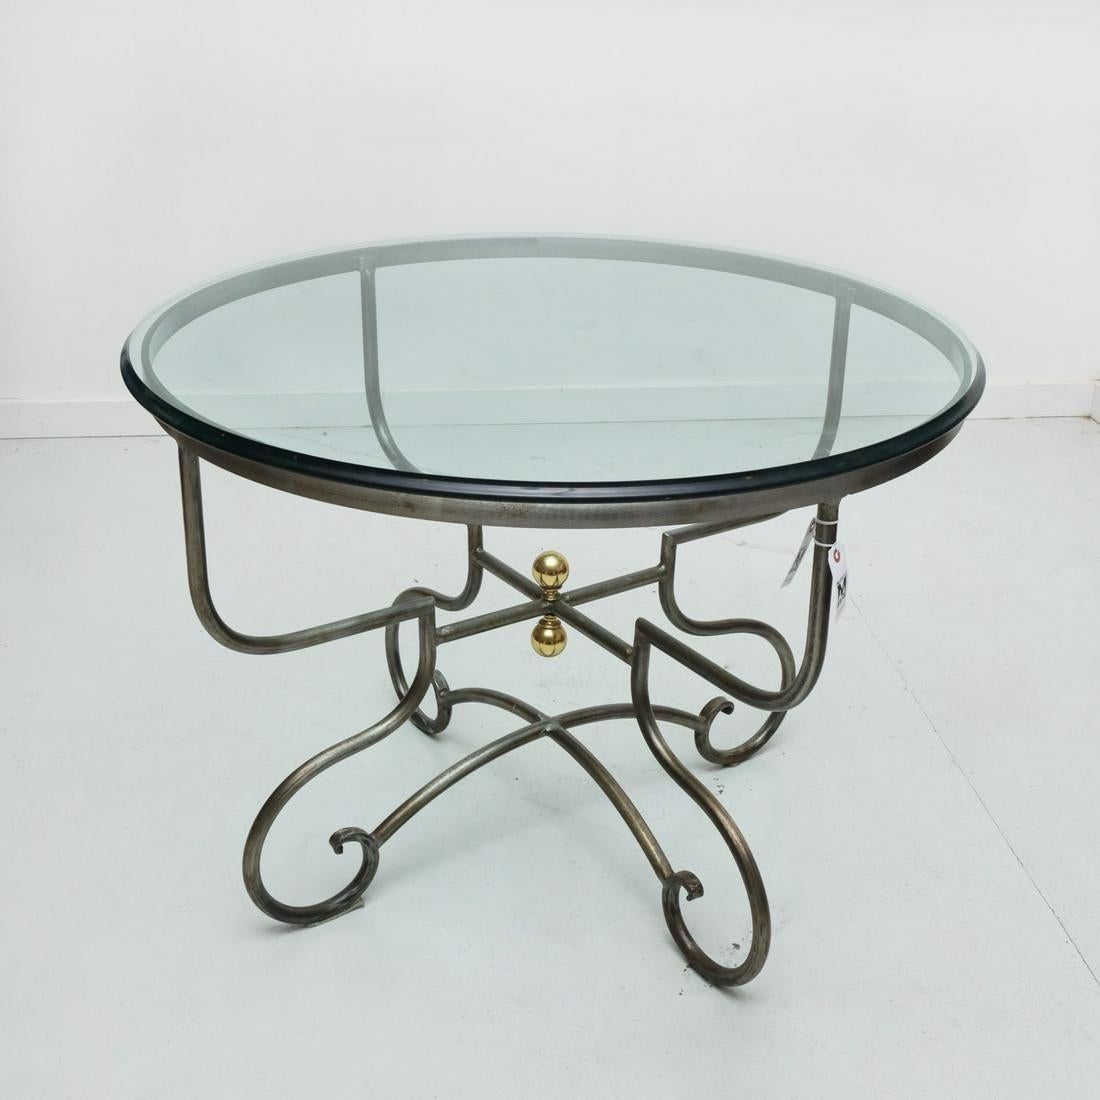 A wrought steel and glass round table, with scrolled legs and brass ball finials, retailed by Pierre Deux and manufactured by Arrowsmith Forge. 20th century stamped 